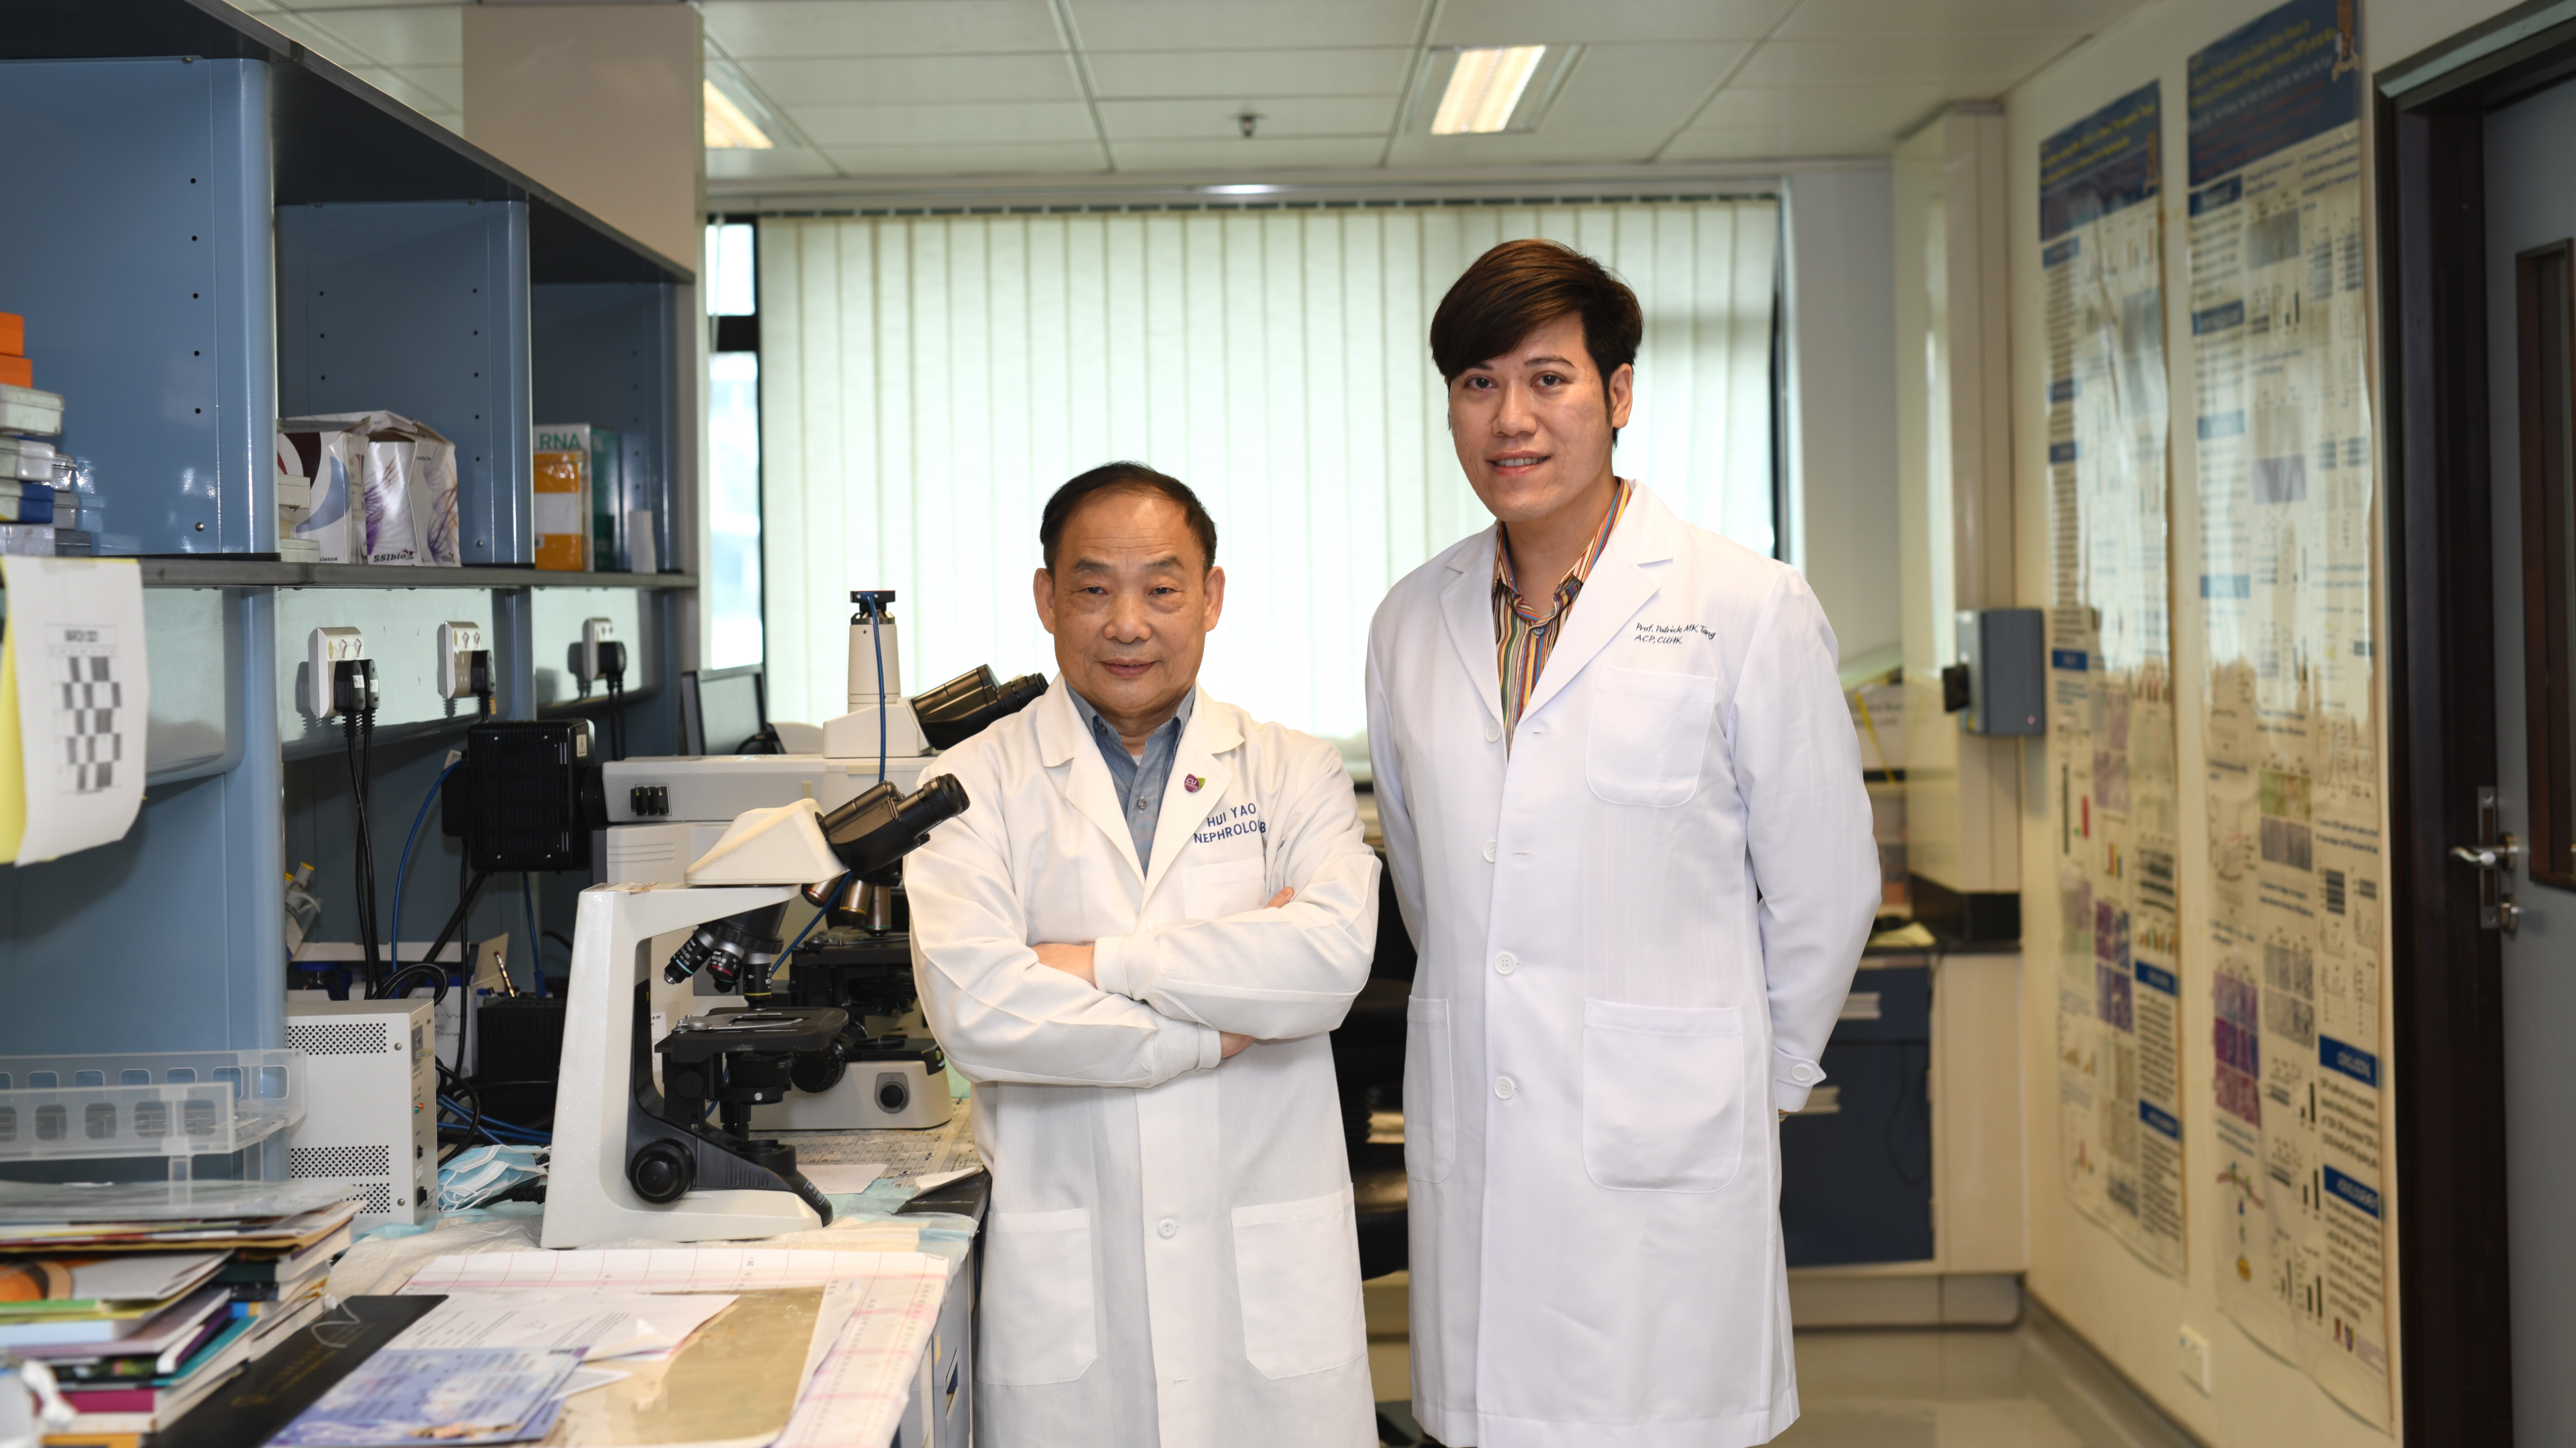 Members: Dr. Patrick Ming Kuen TANG, Assistant Professor of the Department of Anatomical and Cellular Pathology and Prof LAN Huiyao, Choh-Ming Li Research Professor of Biomedical Sciences